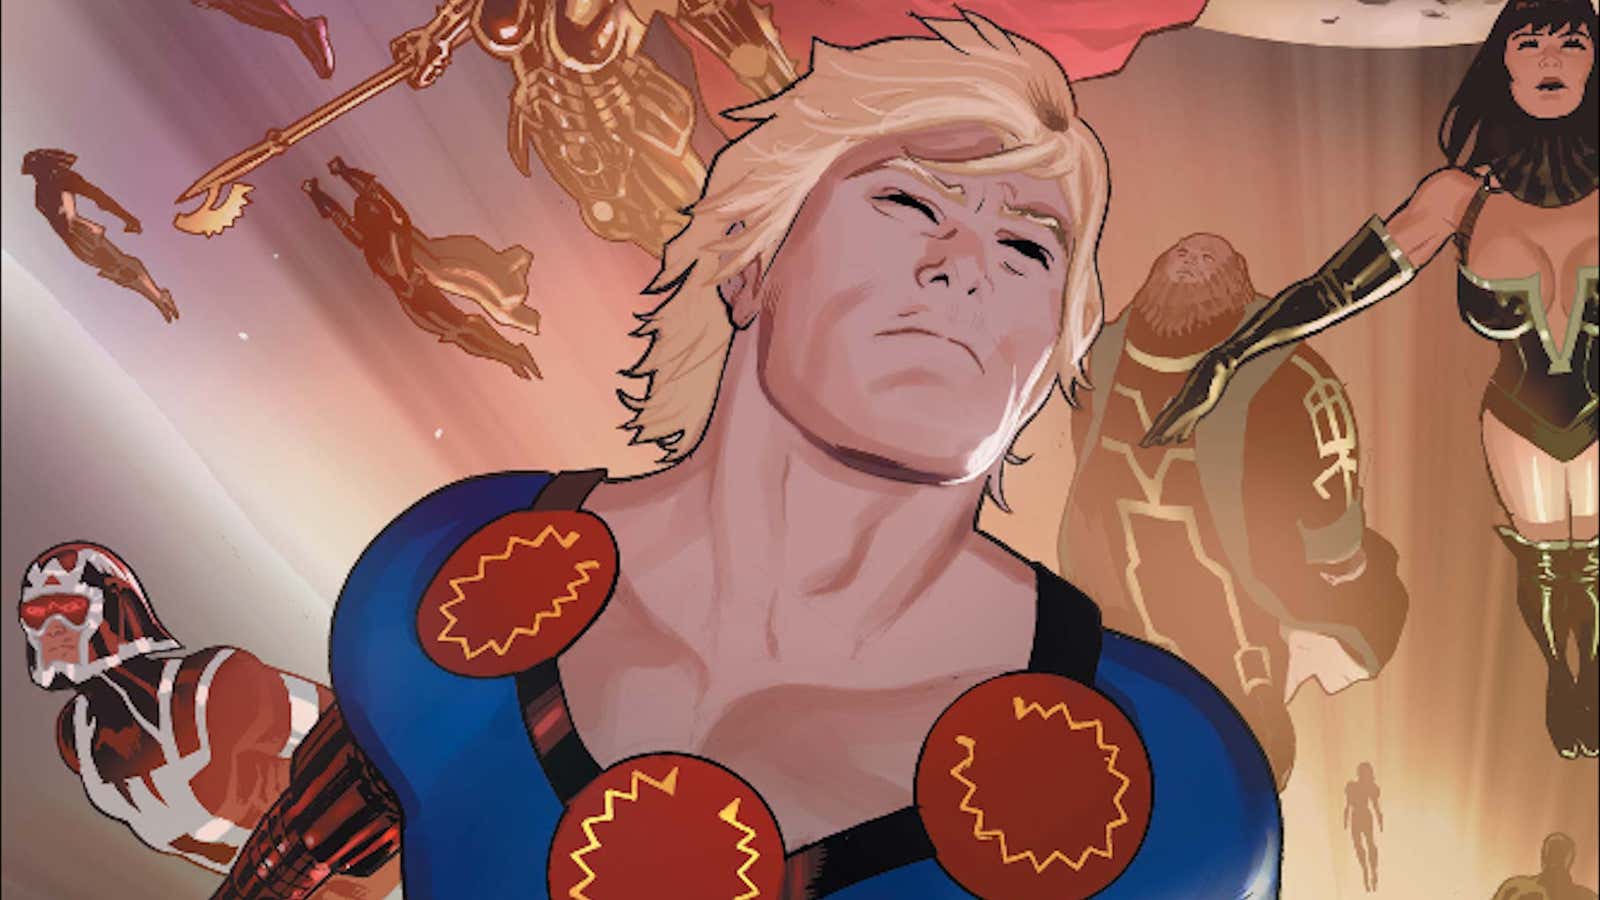 Meet <i>The Eternals</i>, Marvel’s next obscure property bound for the big screen